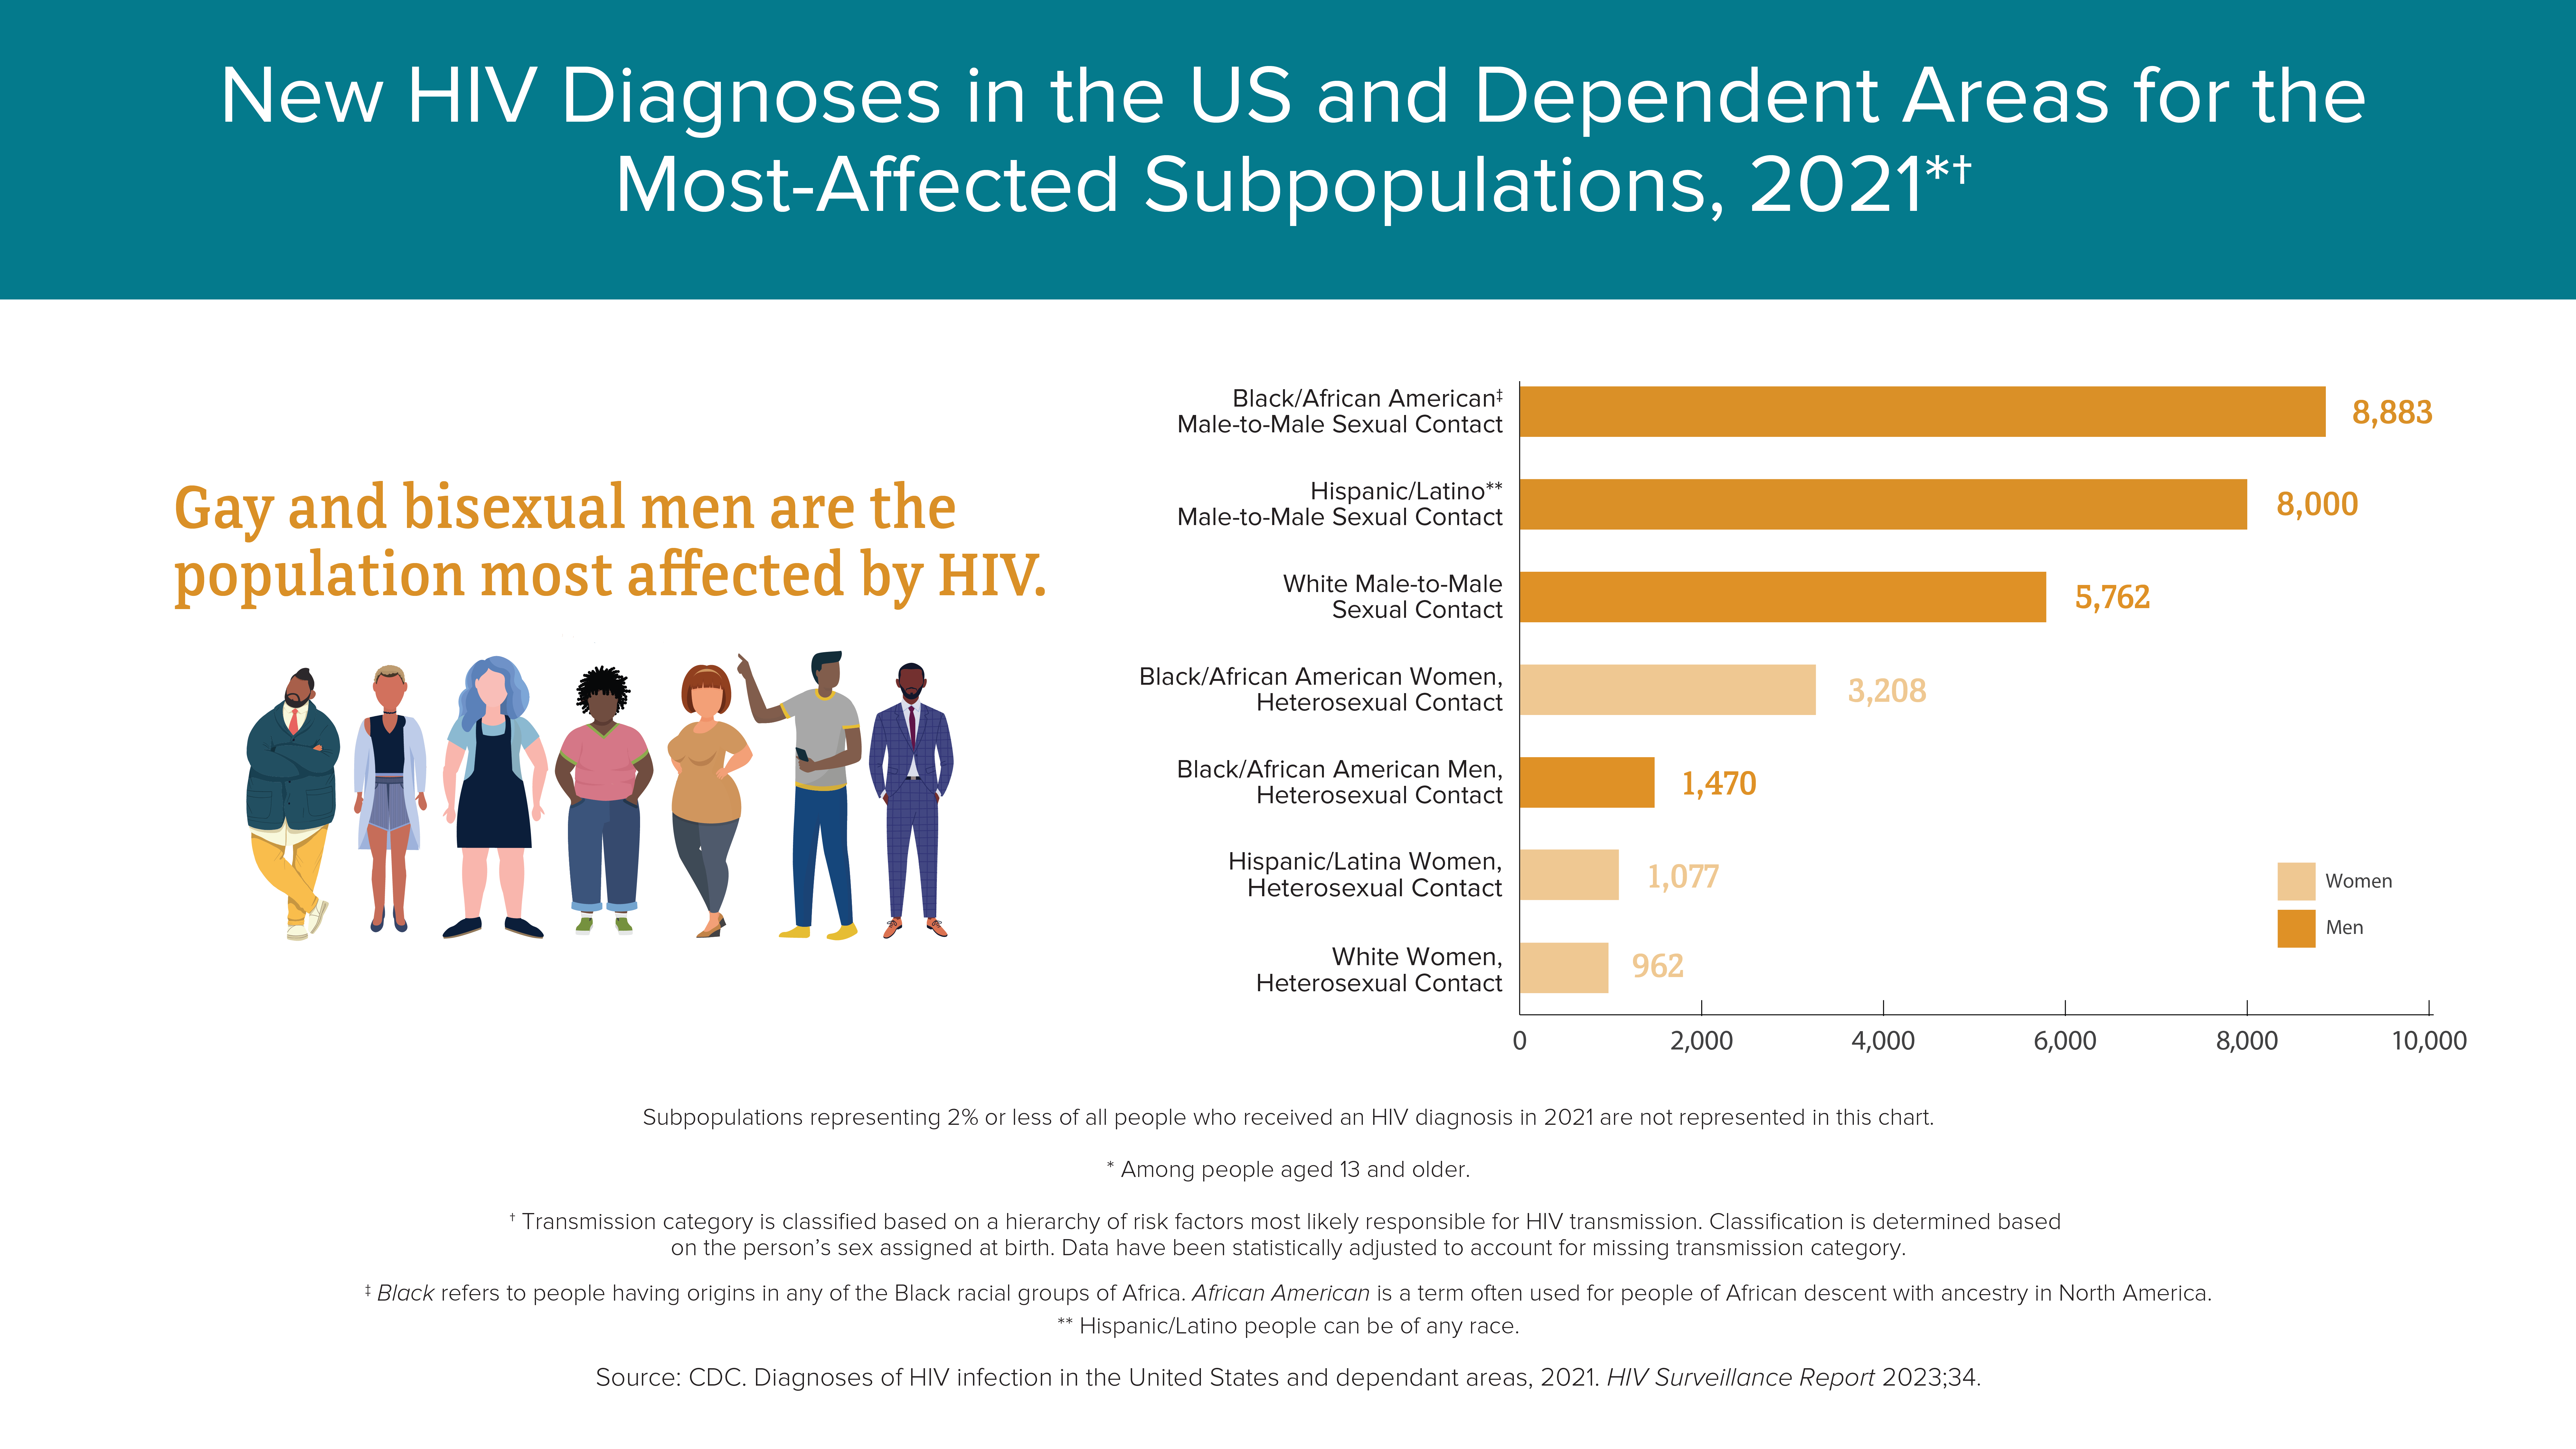 CDC bar graph showing most affected sub-populations in the USA as of 2021